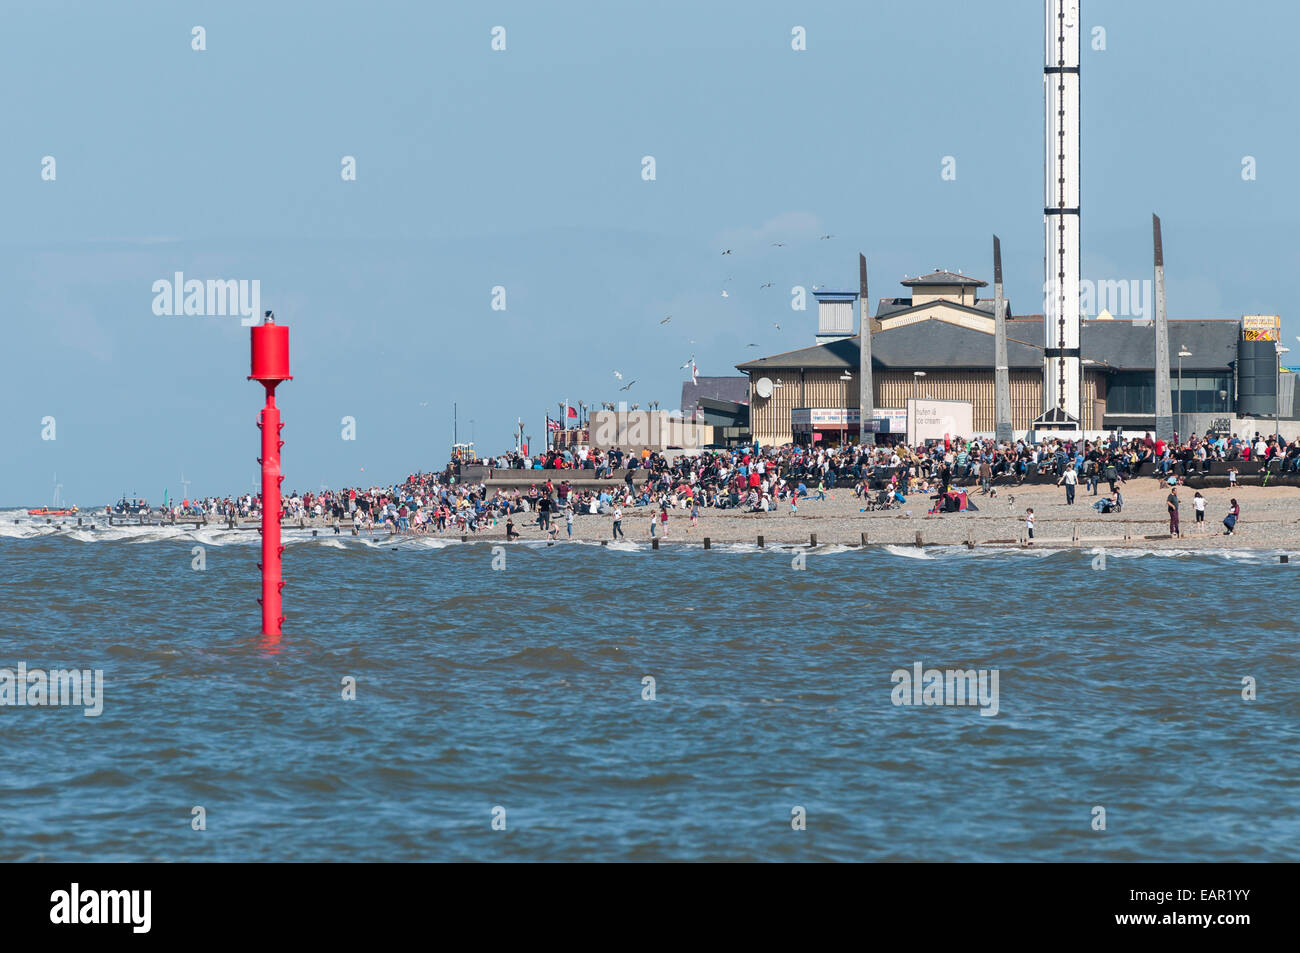 Rhyl Air Show August 31st 2014 showing sky tower and Rhyl beach with spectators. Stock Photo